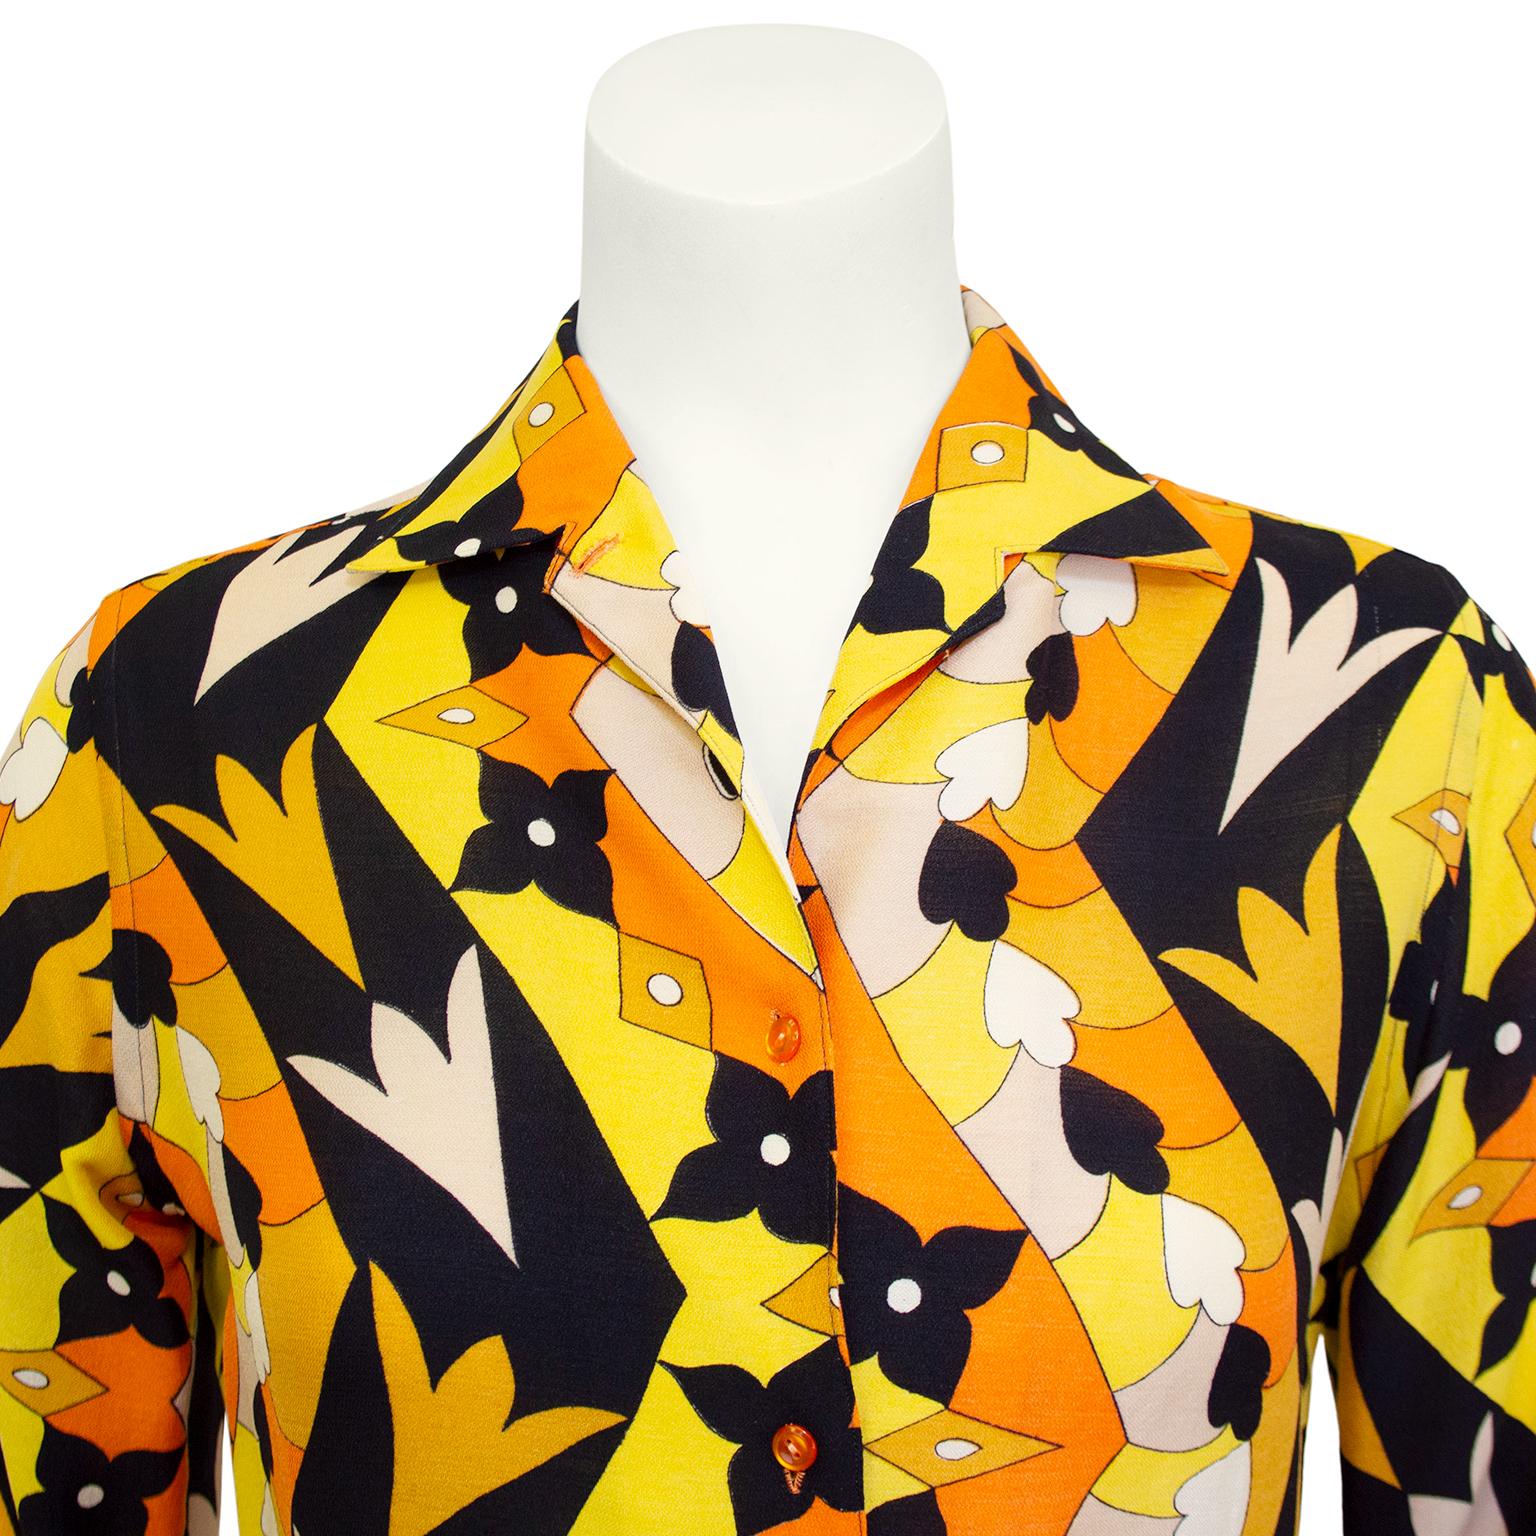 Women's 1970s Paola Davitti Belted Orange, Yellow and Black Geometric Printed Blouse For Sale